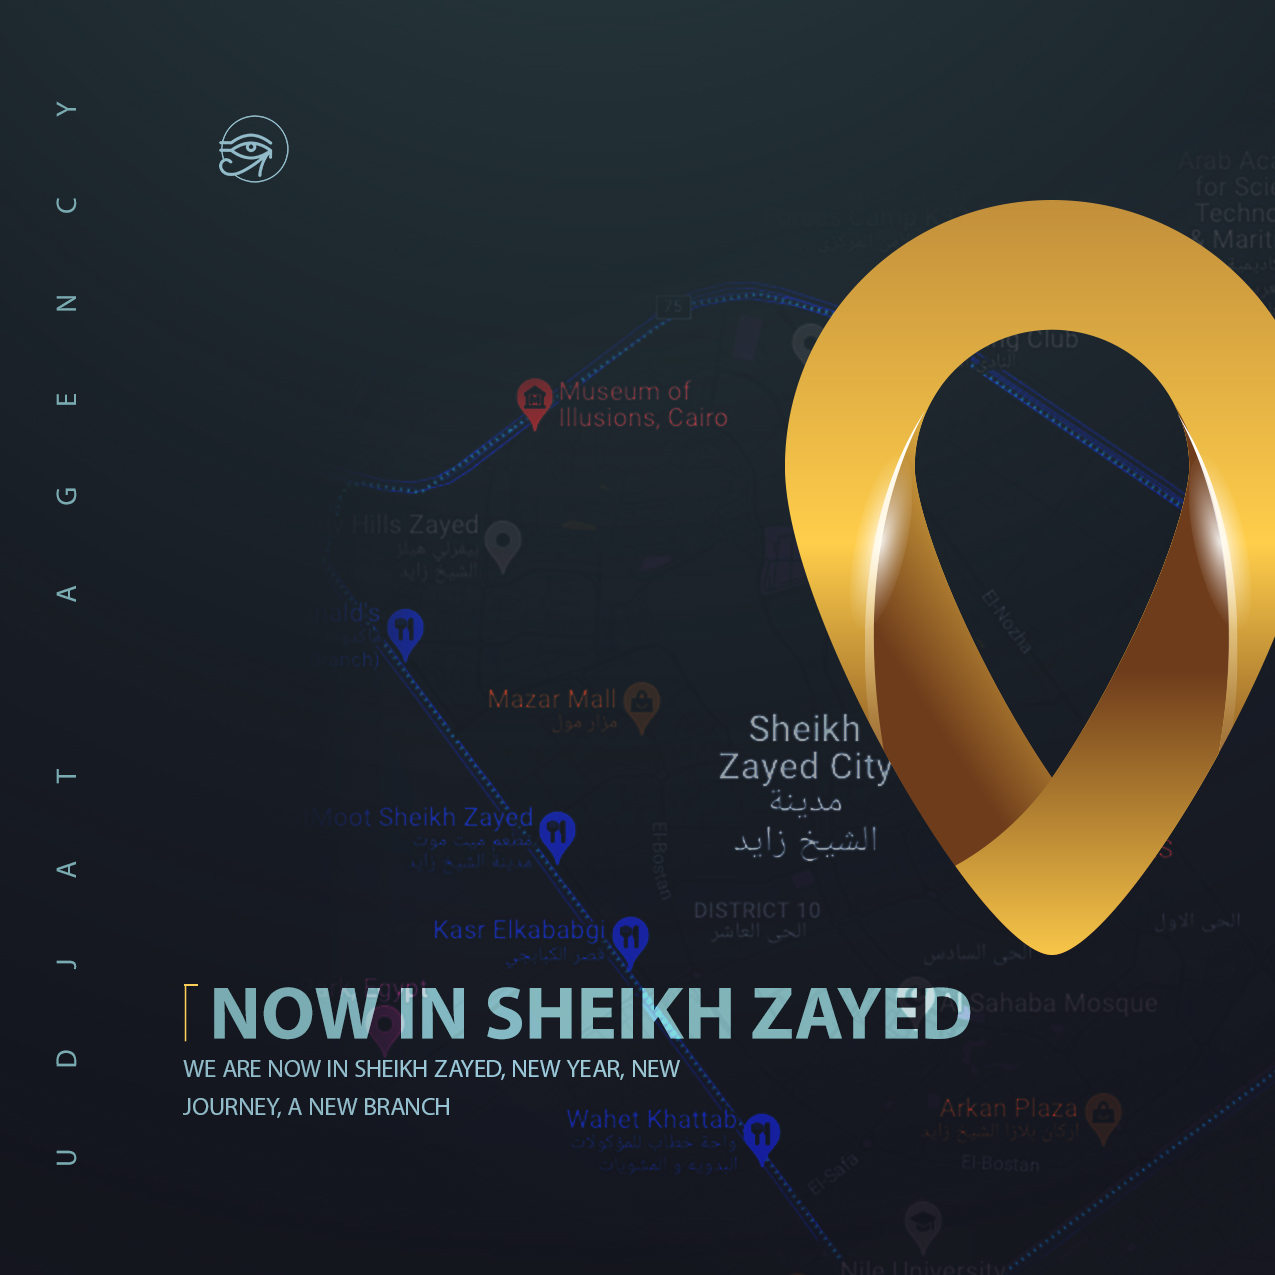 Udjat is now in sheikh zayed, Cairo, and giza